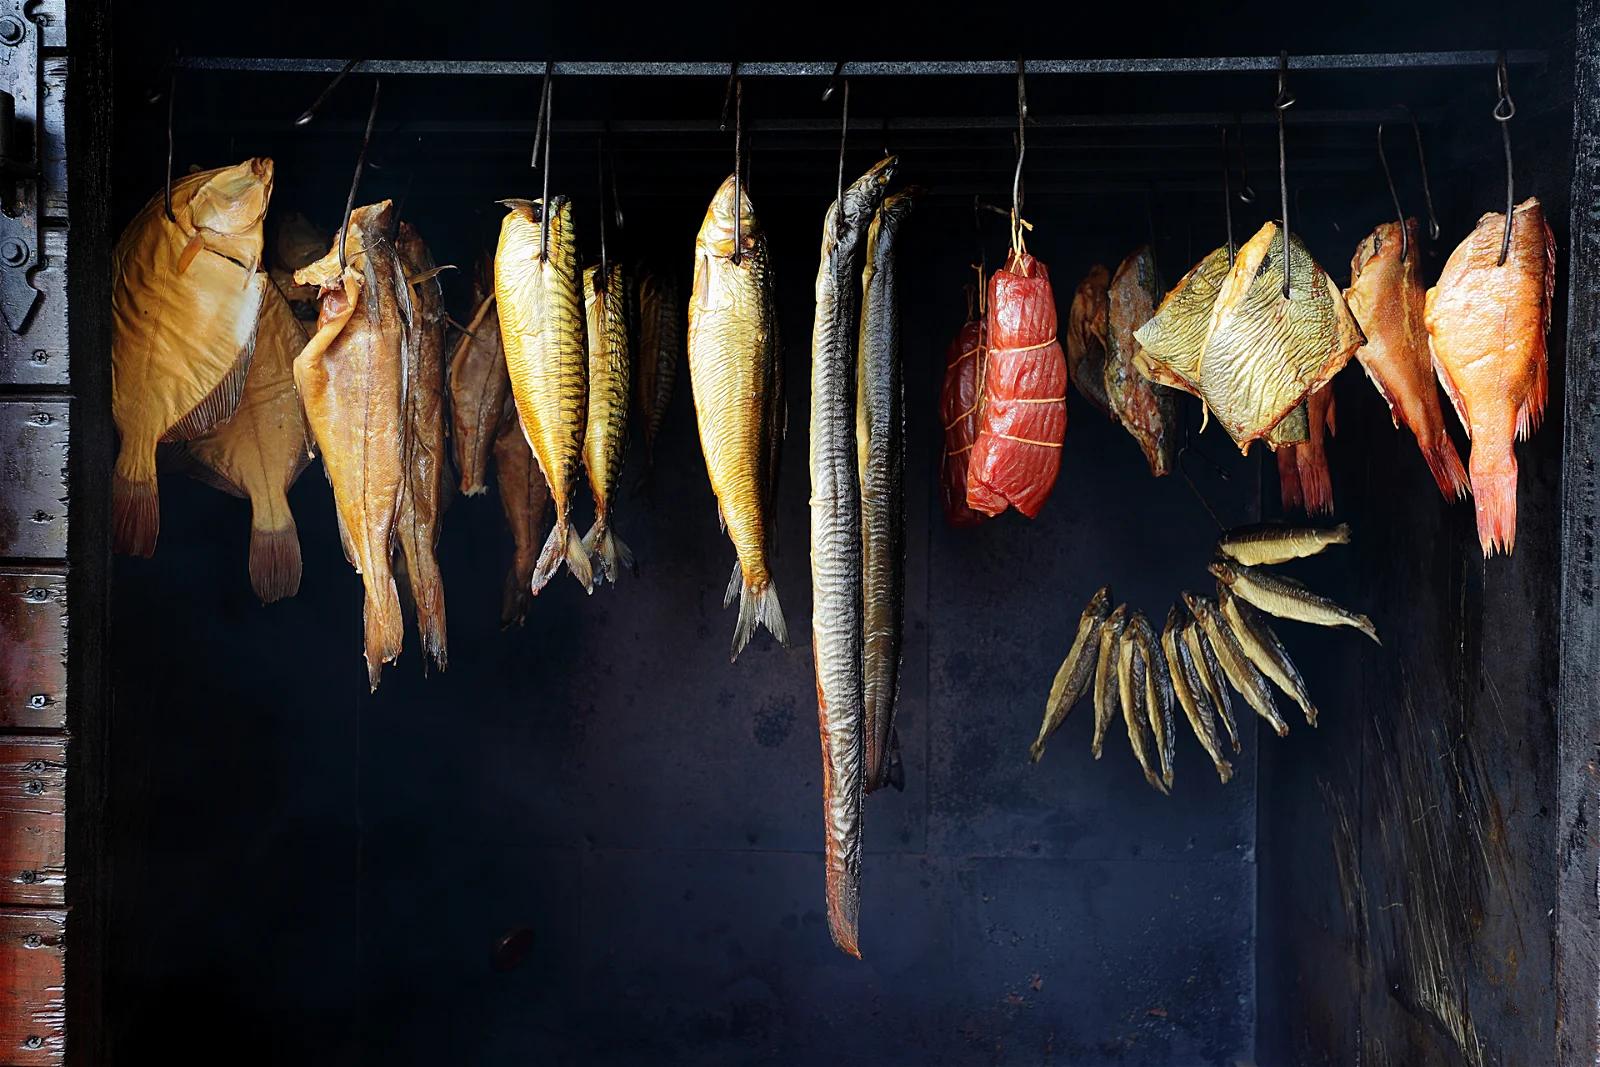 smoked fish types - What kind of fish is best smoked